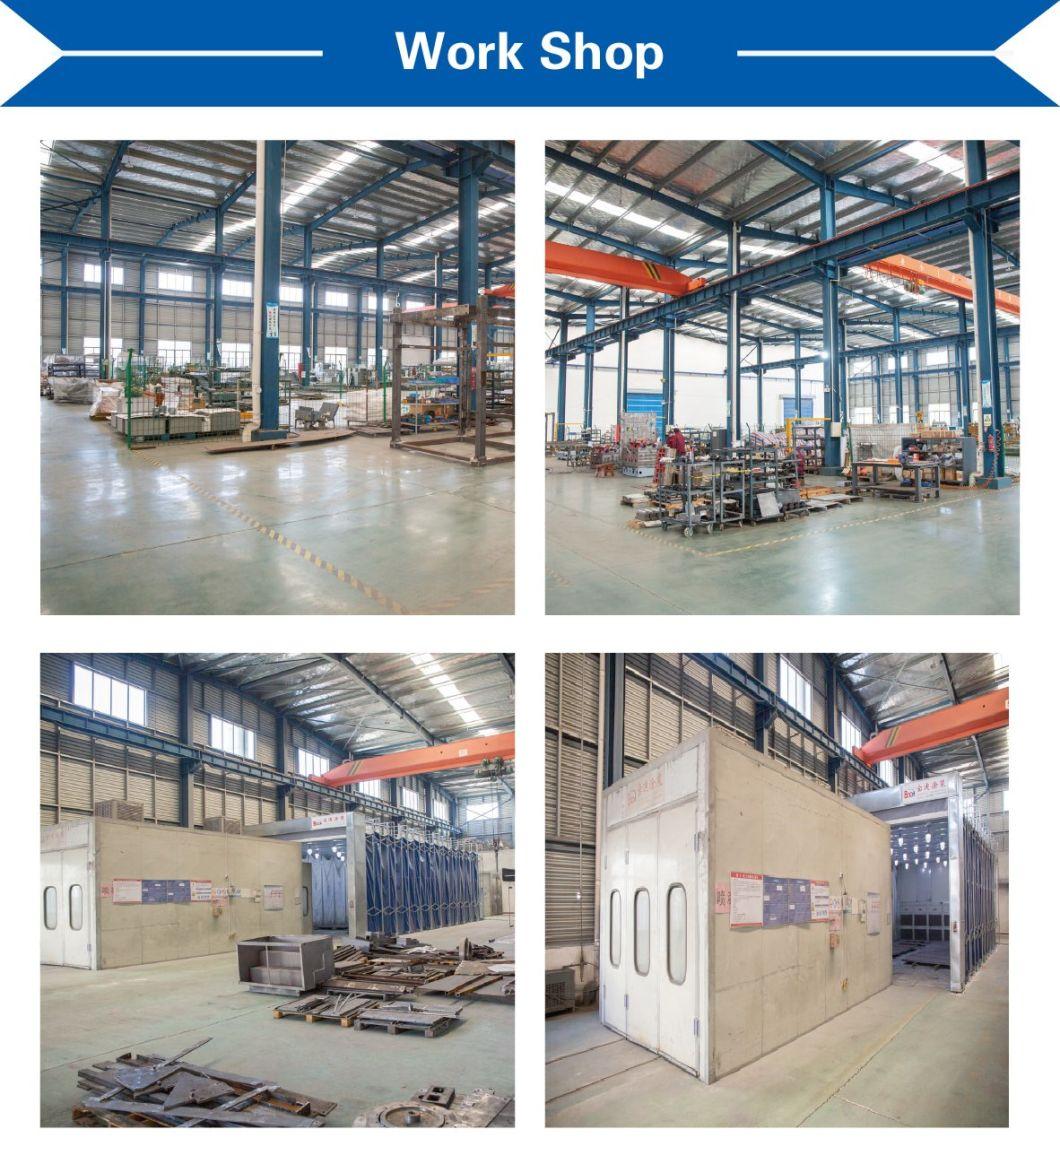 Reliable Quality Automatic High Speed Paper Making Machine and Creasing Machine